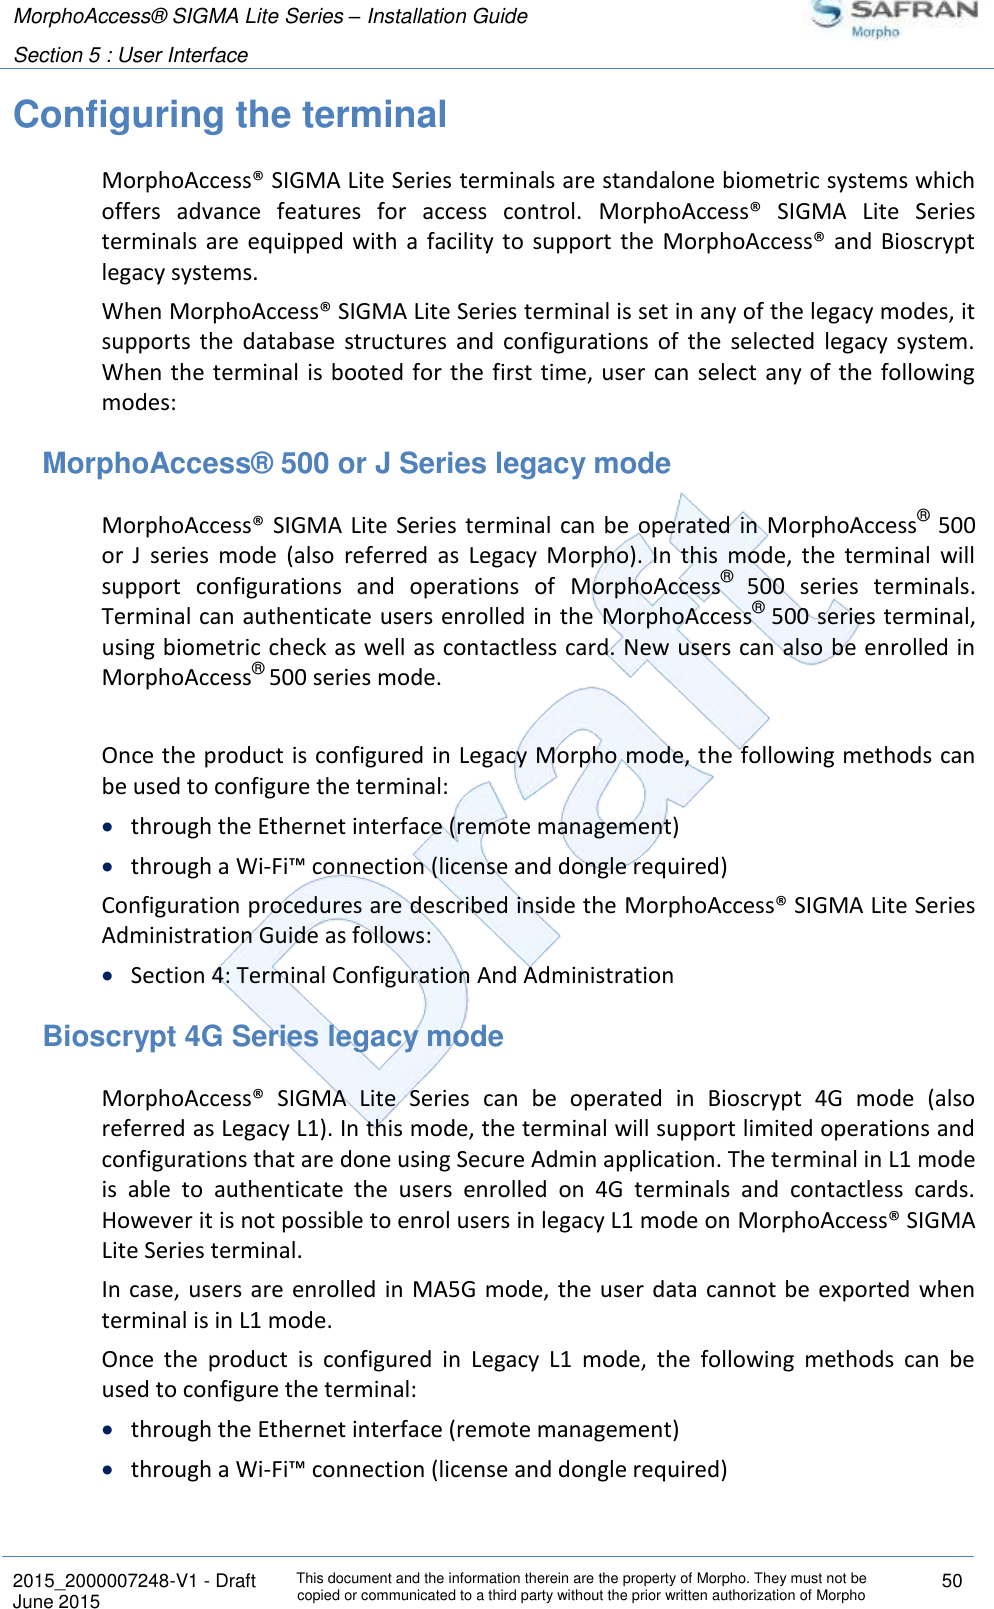 MorphoAccess® SIGMA Lite Series – Installation Guide  Section 5 : User Interface   2015_2000007248-V1 - Draft This document and the information therein are the property of Morpho. They must not be copied or communicated to a third party without the prior written authorization of Morpho 50 June 2015   Configuring the terminal MorphoAccess® SIGMA Lite Series terminals are standalone biometric systems which offers  advance  features  for  access  control.  MorphoAccess®  SIGMA  Lite  Series terminals  are  equipped with  a  facility  to  support  the  MorphoAccess® and  Bioscrypt legacy systems. When MorphoAccess® SIGMA Lite Series terminal is set in any of the legacy modes, it supports  the  database  structures  and  configurations  of  the  selected  legacy  system. When the terminal  is booted  for the first  time, user  can select any of the following modes: MorphoAccess® 500 or J Series legacy mode MorphoAccess®  SIGMA Lite  Series terminal can be operated in  MorphoAccess® 500 or  J  series  mode  (also  referred  as  Legacy  Morpho).  In  this  mode,  the  terminal  will support  configurations  and  operations  of  MorphoAccess®  500  series  terminals. Terminal can authenticate users enrolled in the MorphoAccess® 500 series terminal, using biometric check as well as contactless card. New users can also be enrolled in MorphoAccess® 500 series mode.  Once the product is configured in Legacy Morpho mode, the following methods can be used to configure the terminal:  through the Ethernet interface (remote management)  through a Wi-Fi™ connection (license and dongle required) Configuration procedures are described inside the MorphoAccess® SIGMA Lite Series Administration Guide as follows:  Section 4: Terminal Configuration And Administration Bioscrypt 4G Series legacy mode MorphoAccess®  SIGMA  Lite  Series  can  be  operated  in  Bioscrypt  4G  mode  (also referred as Legacy L1). In this mode, the terminal will support limited operations and configurations that are done using Secure Admin application. The terminal in L1 mode is  able  to  authenticate  the  users  enrolled  on  4G  terminals  and  contactless  cards. However it is not possible to enrol users in legacy L1 mode on MorphoAccess® SIGMA Lite Series terminal. In case, users  are enrolled in  MA5G  mode, the  user data cannot be exported  when terminal is in L1 mode. Once  the  product  is  configured  in  Legacy  L1  mode,  the  following  methods  can  be used to configure the terminal:  through the Ethernet interface (remote management)  through a Wi-Fi™ connection (license and dongle required) 